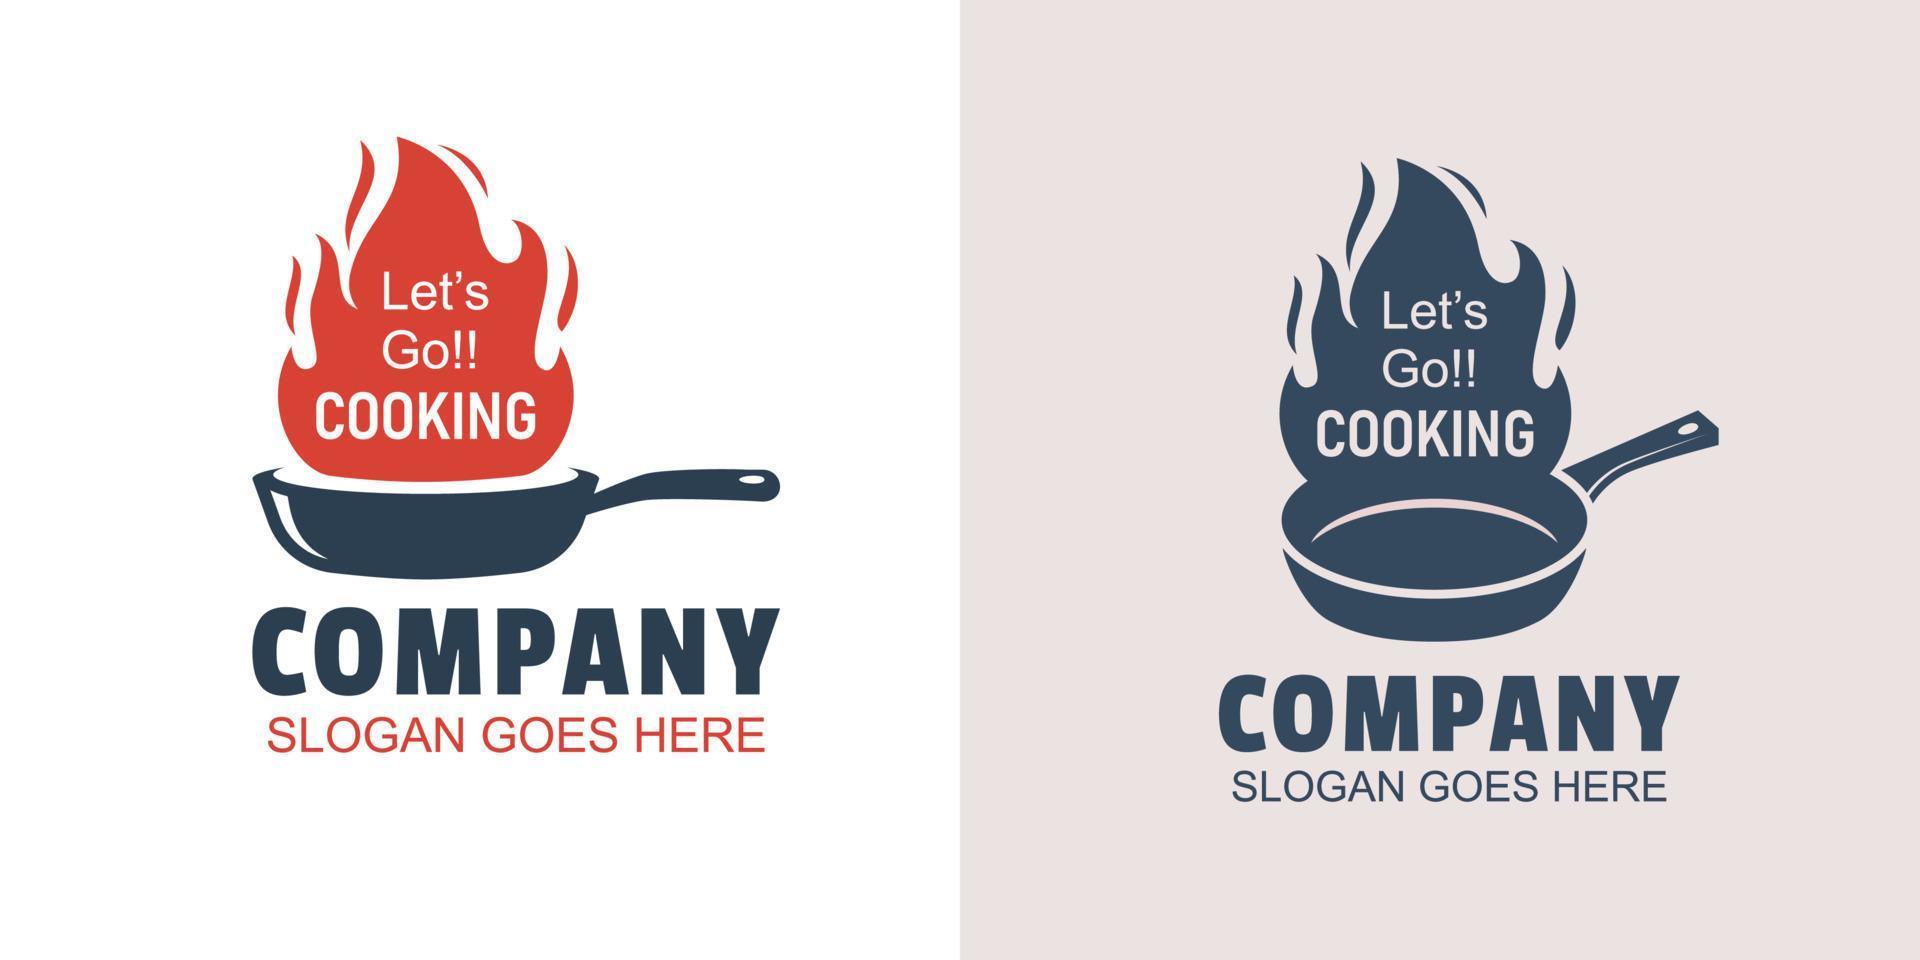 Vintage retro hot cook logos of rustic old skillet cast iron with fire for traditional food restaurant kitchen logo design vector